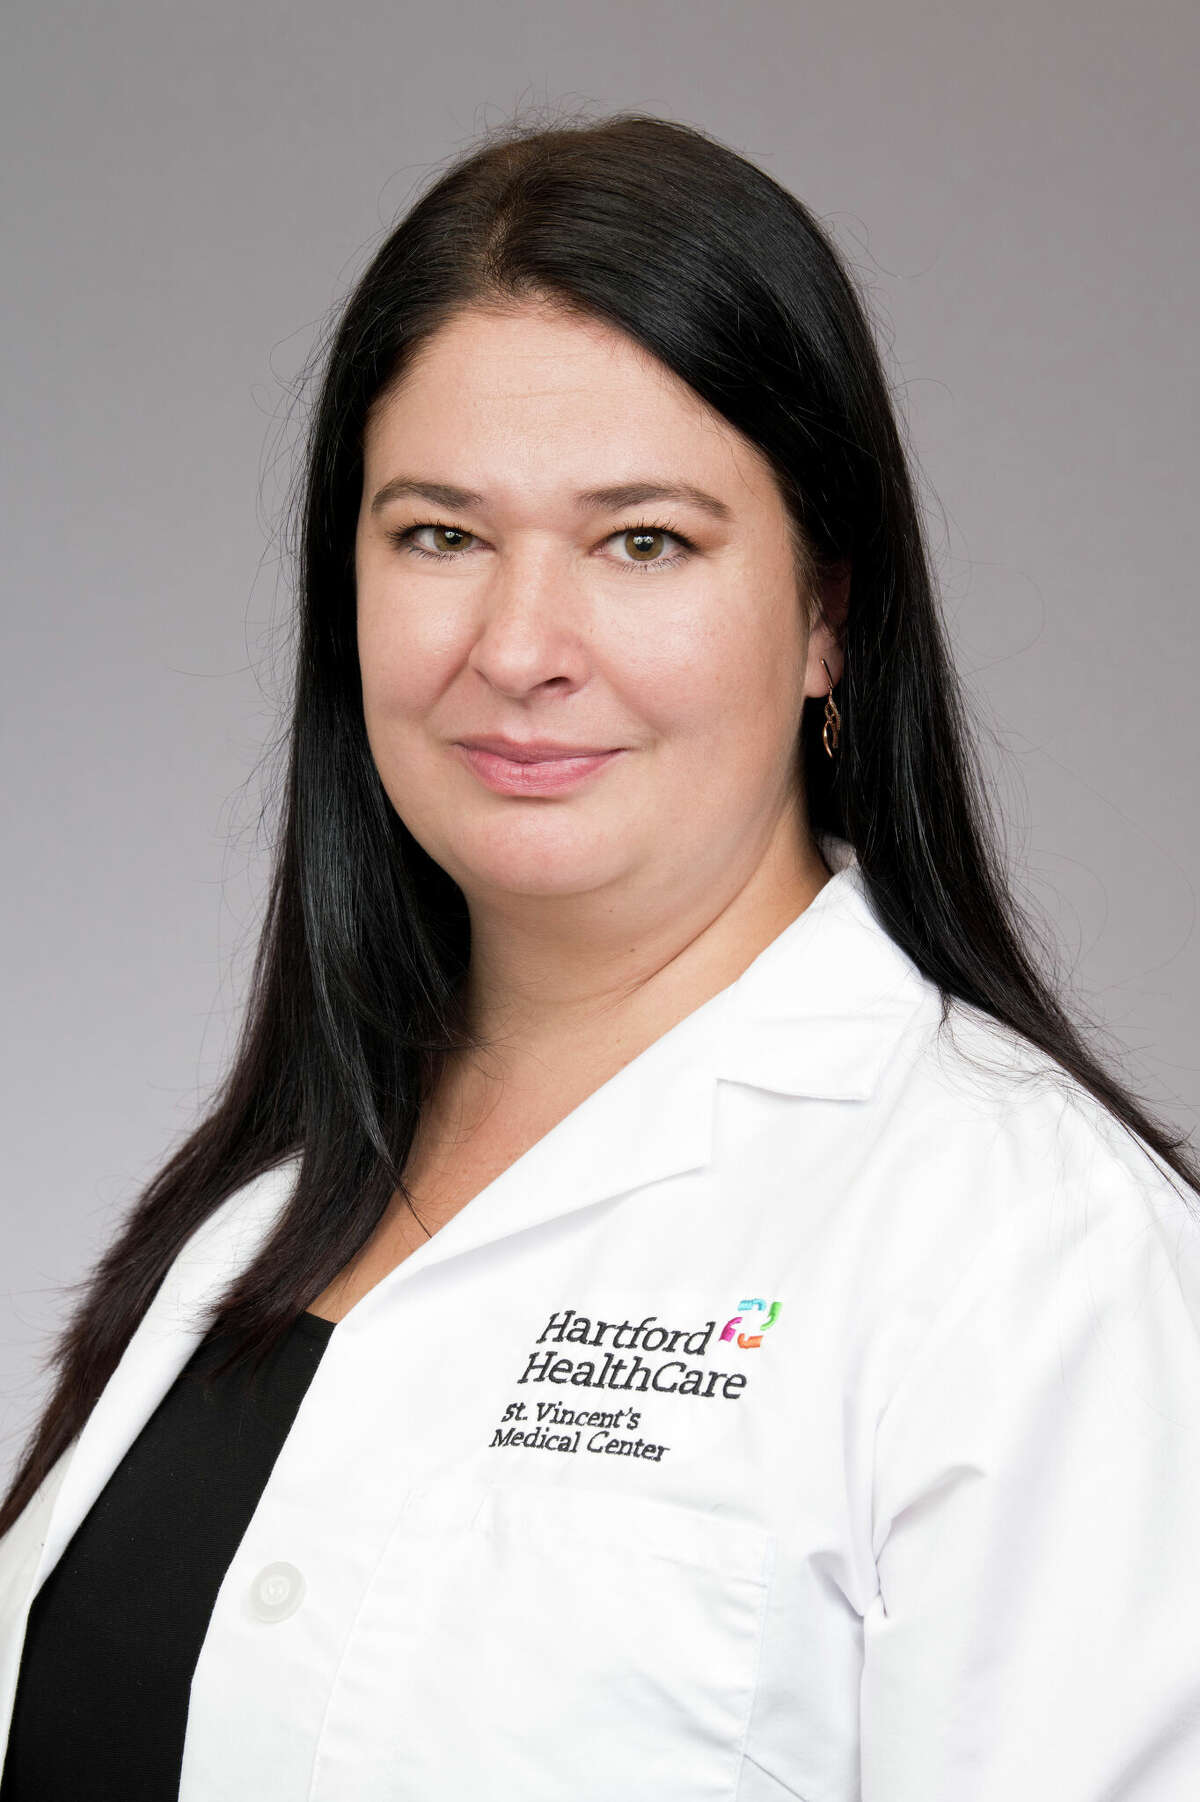 Dr. Emilia Genova is a general surgeon at St. Vincent’s Medical Center who has advanced training in hernia repair.